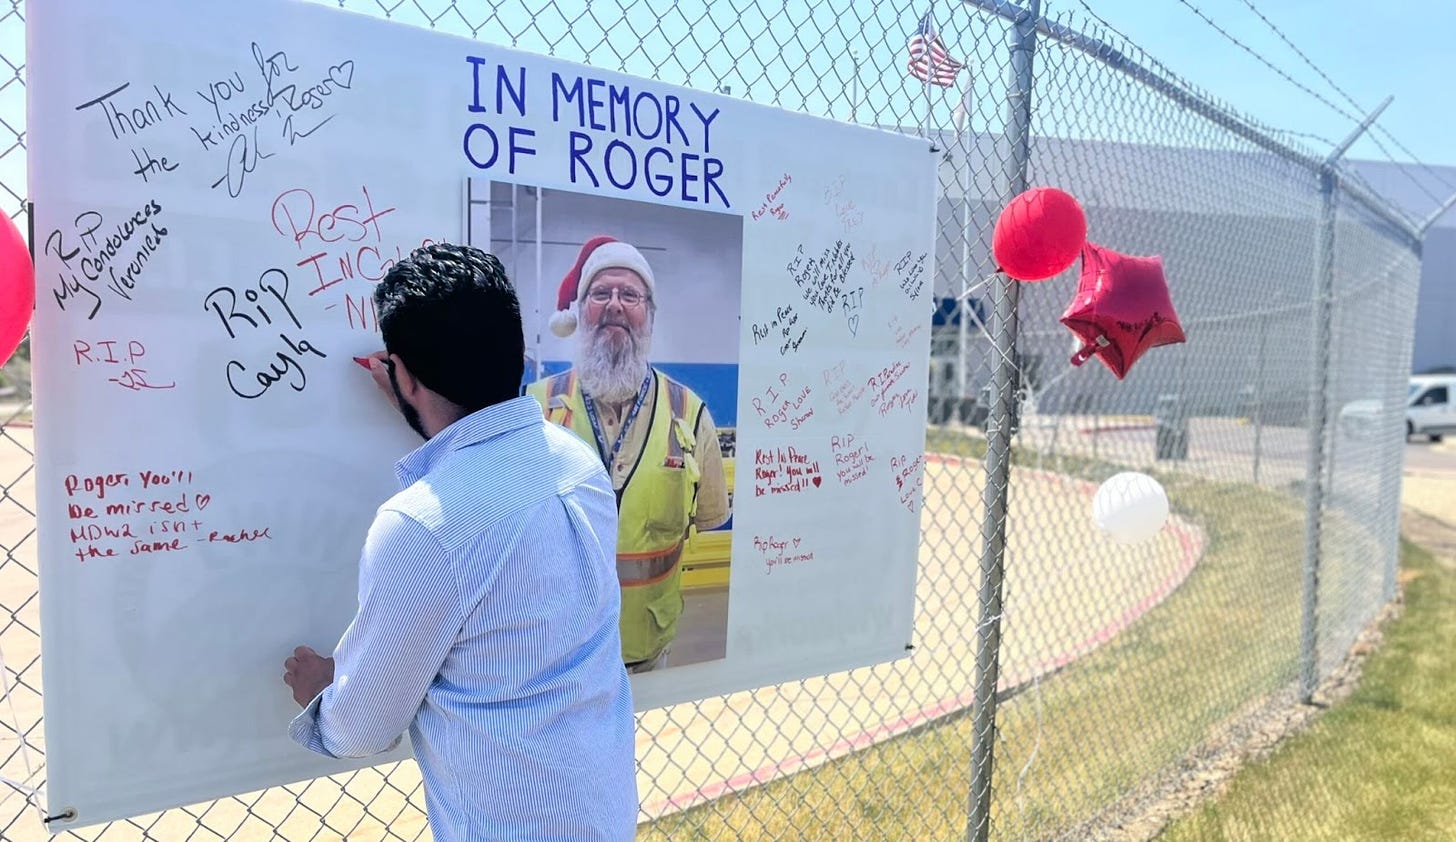 A man stands in front of a white poster with signatures reading "rest in peace" and "in memory of roger" that is hanging on a tall wire fence